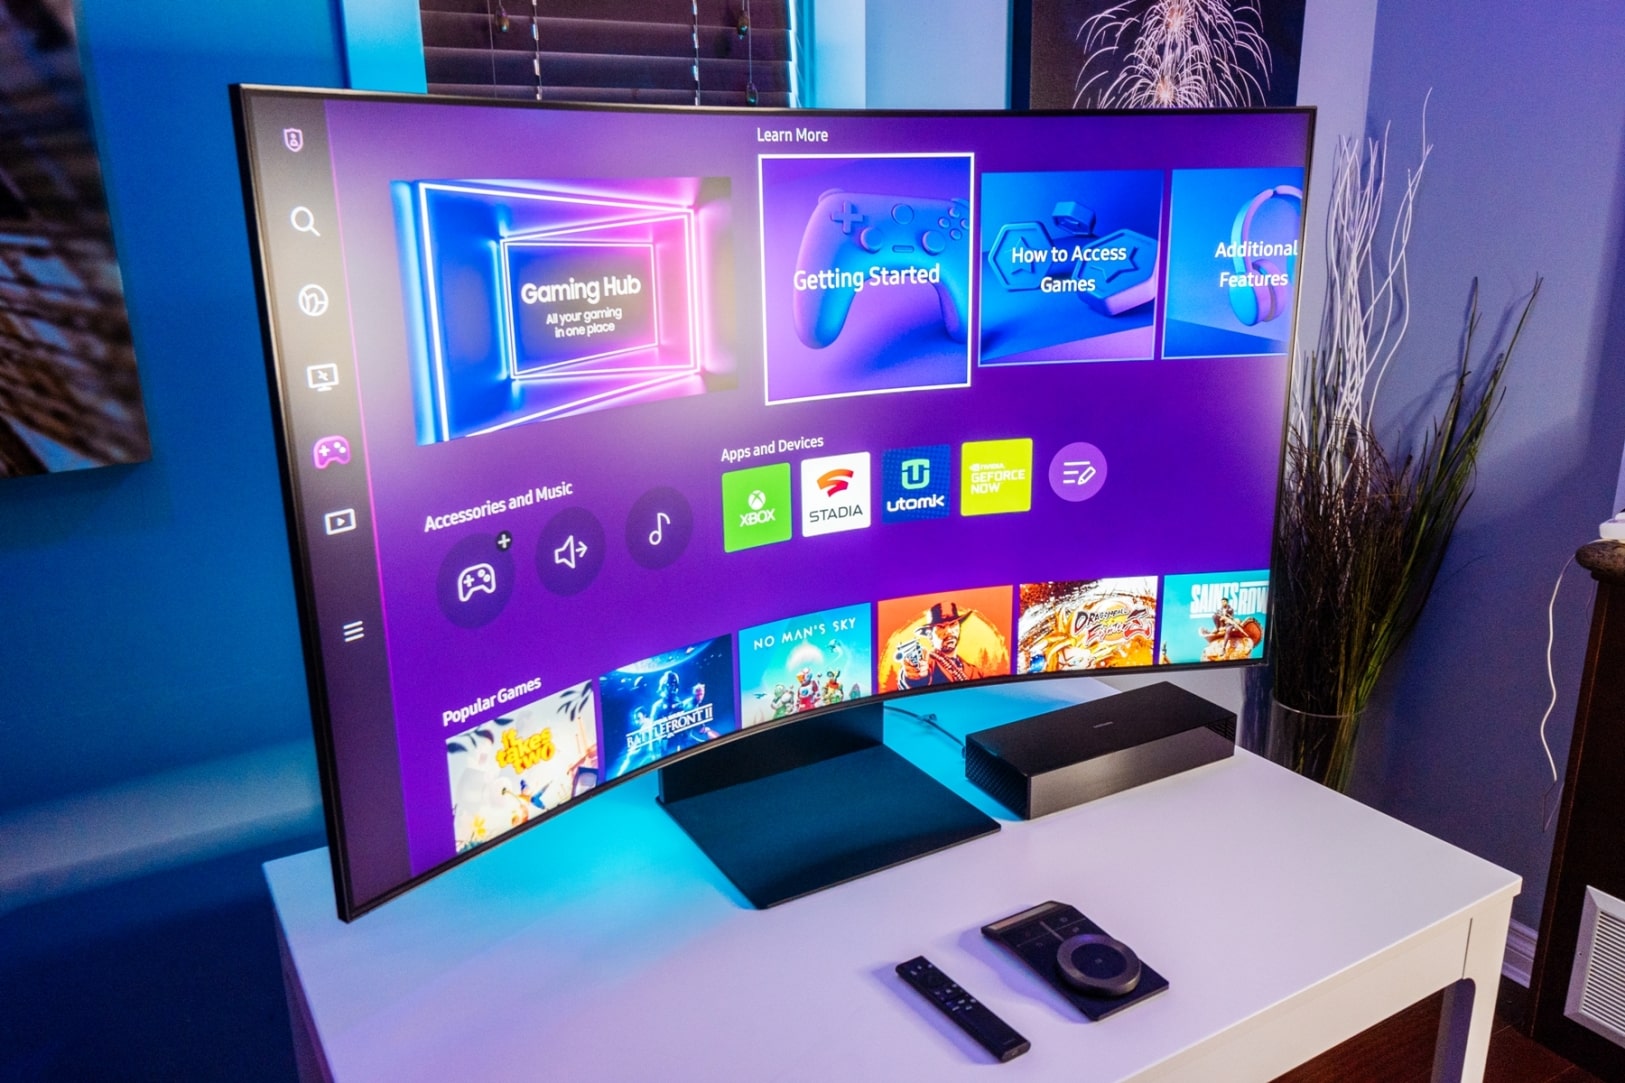 Come see Samsung's giant 55-inch Odyssey Ark curved monitor at CES